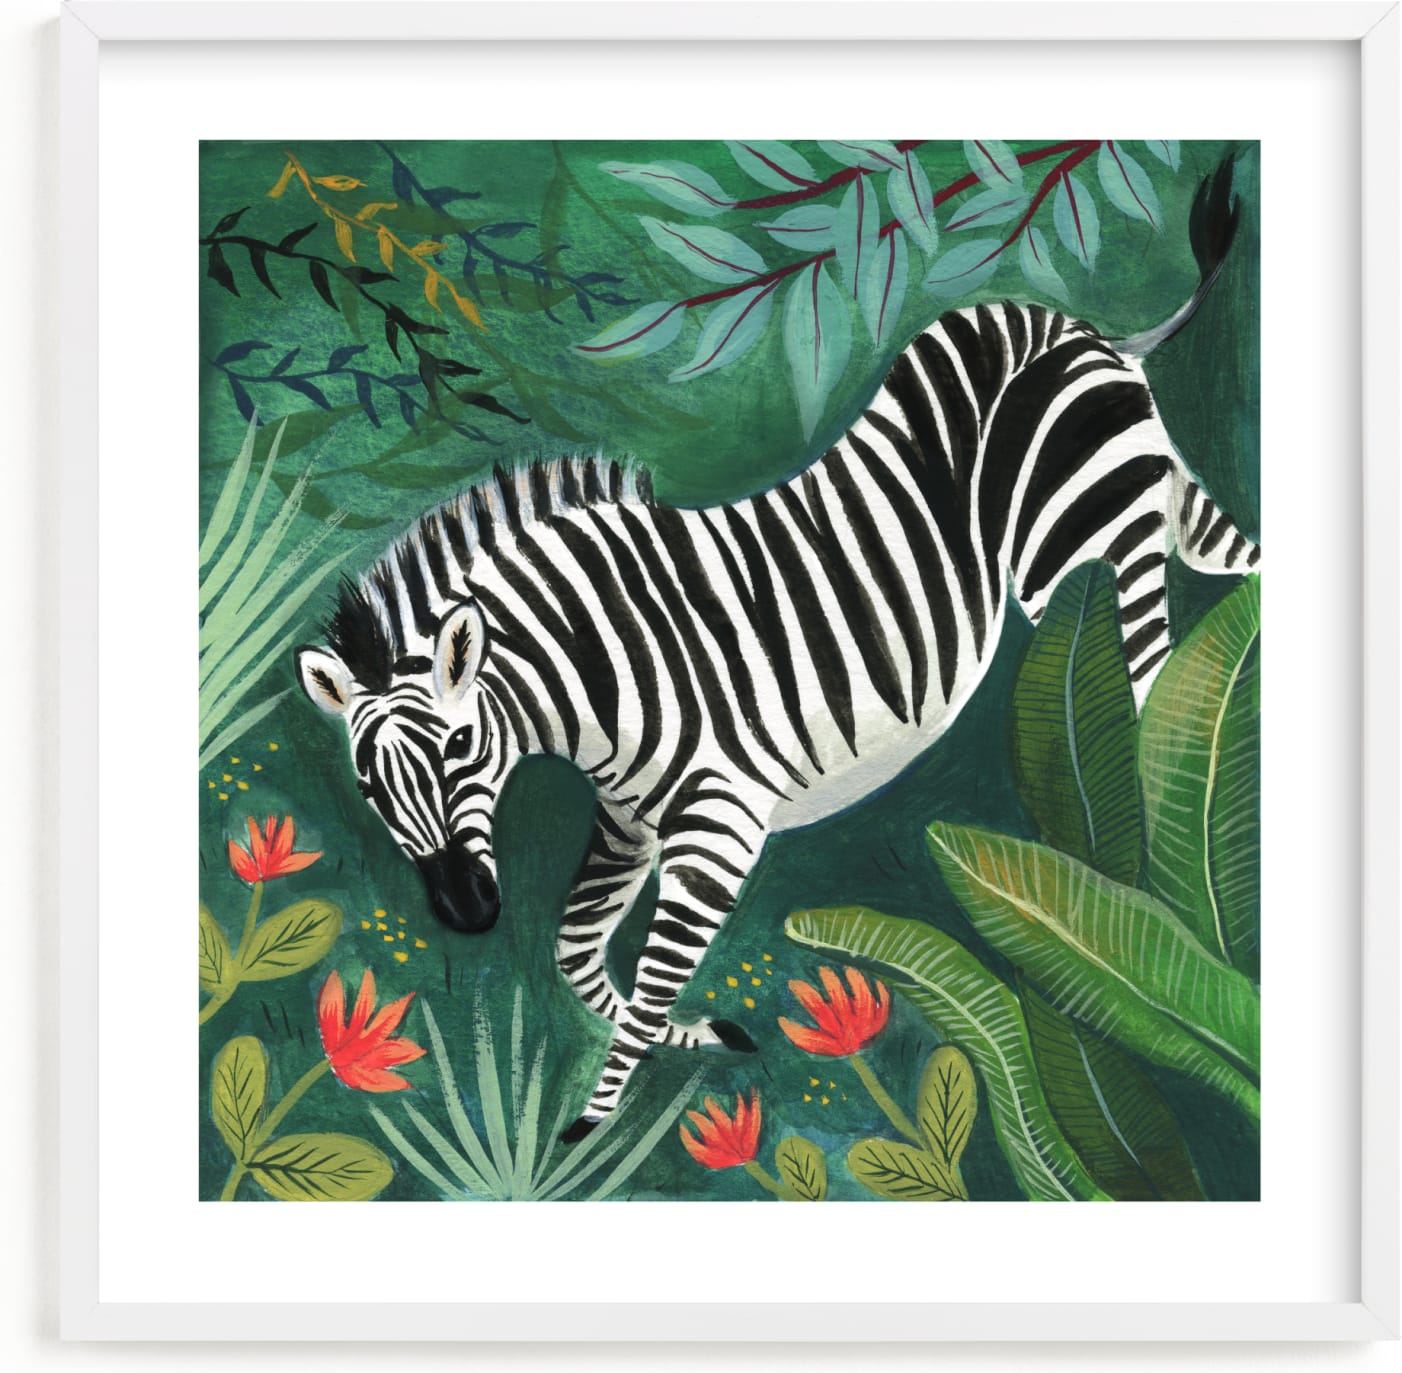 This is a black and white kids wall art by Emilie Simpson called Zebra.